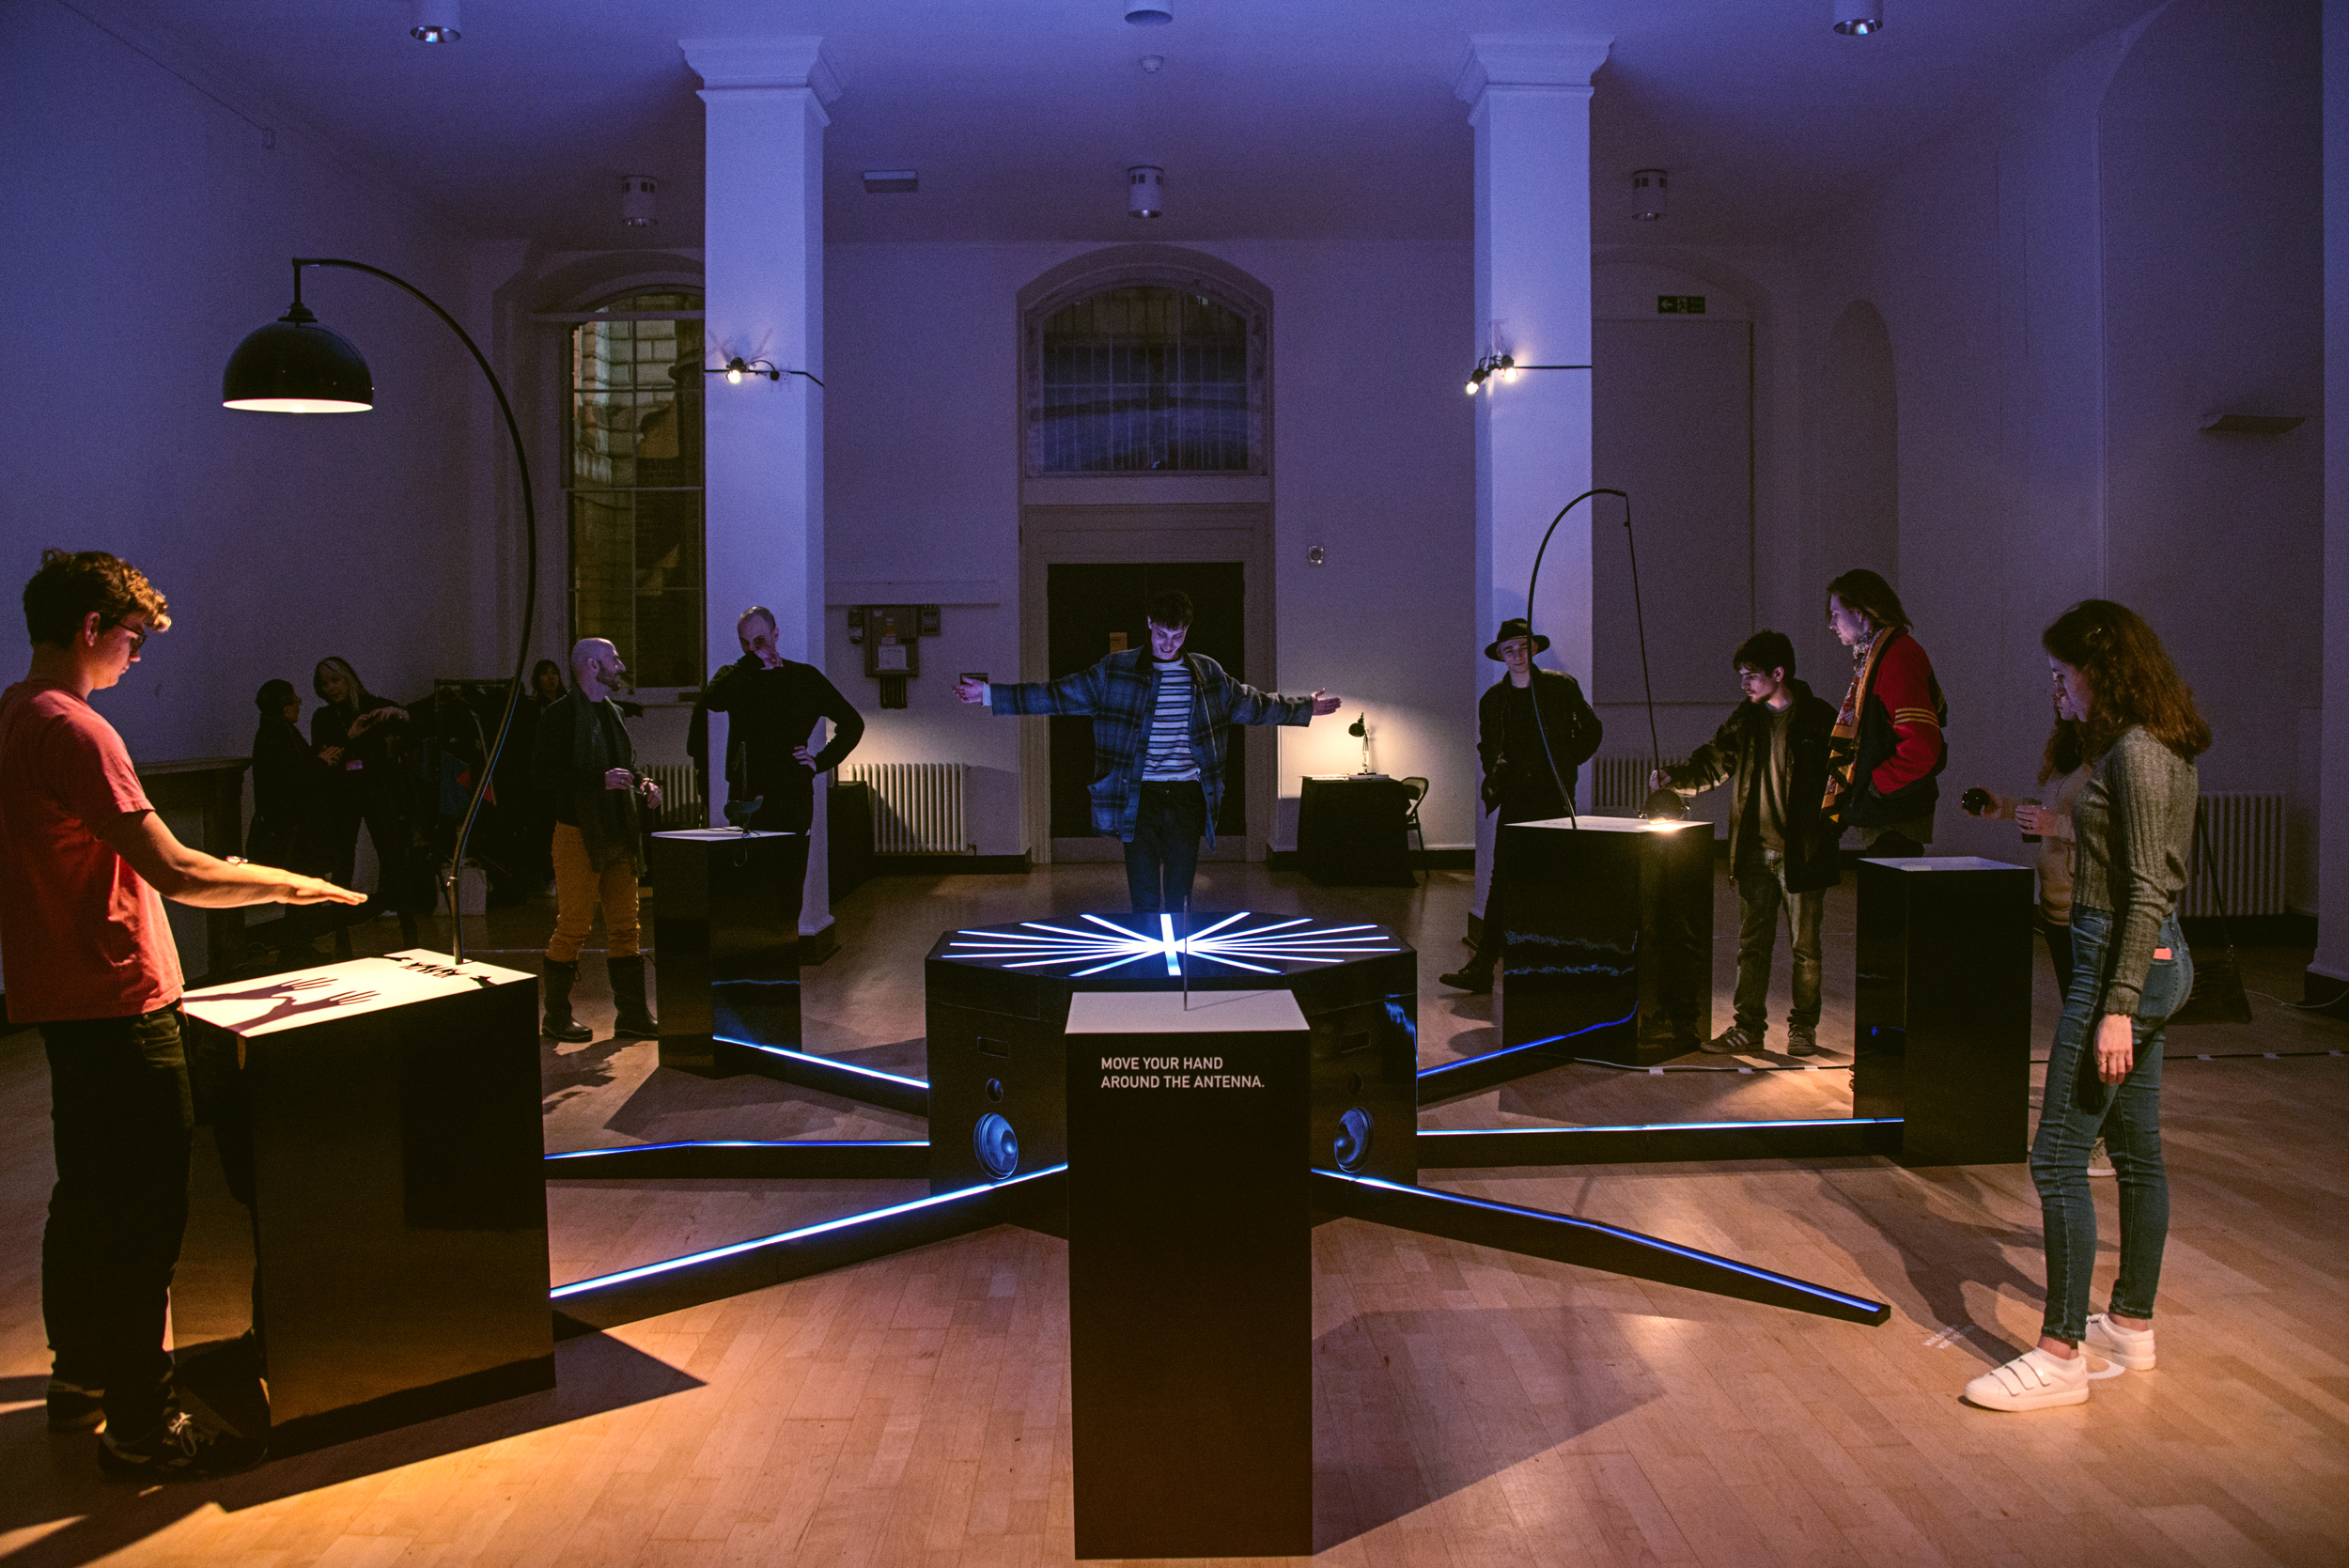 Participants collaborate to create music through bespoke instruments that use light, movement and touch, at the preview of Cave of Sounds at Music Hackspace, Somerset House Studios, Jan 2018. Photo: Suzi Corker